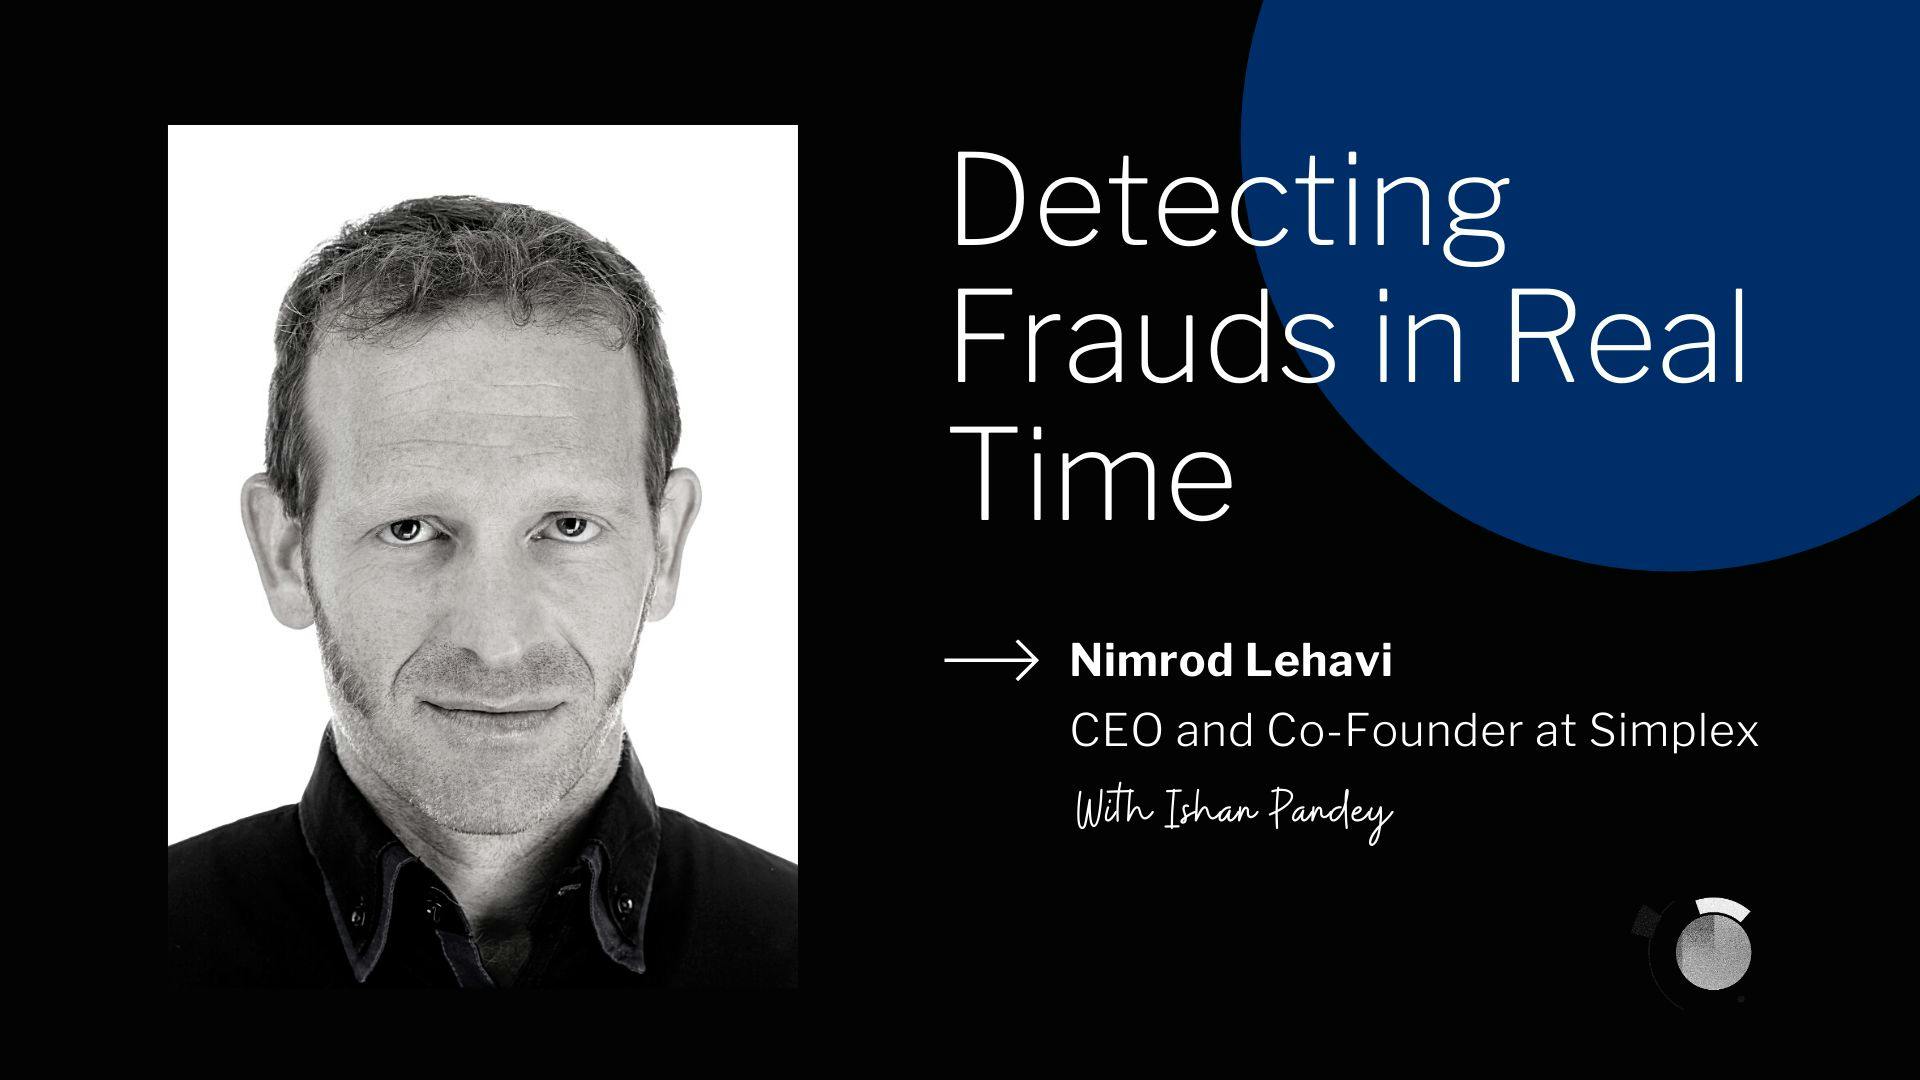 /fraud-prevention-requires-creative-and-analytical-thinking-to-stay-two-steps-ahead-nimrod-lehavi-1l3233l7 feature image